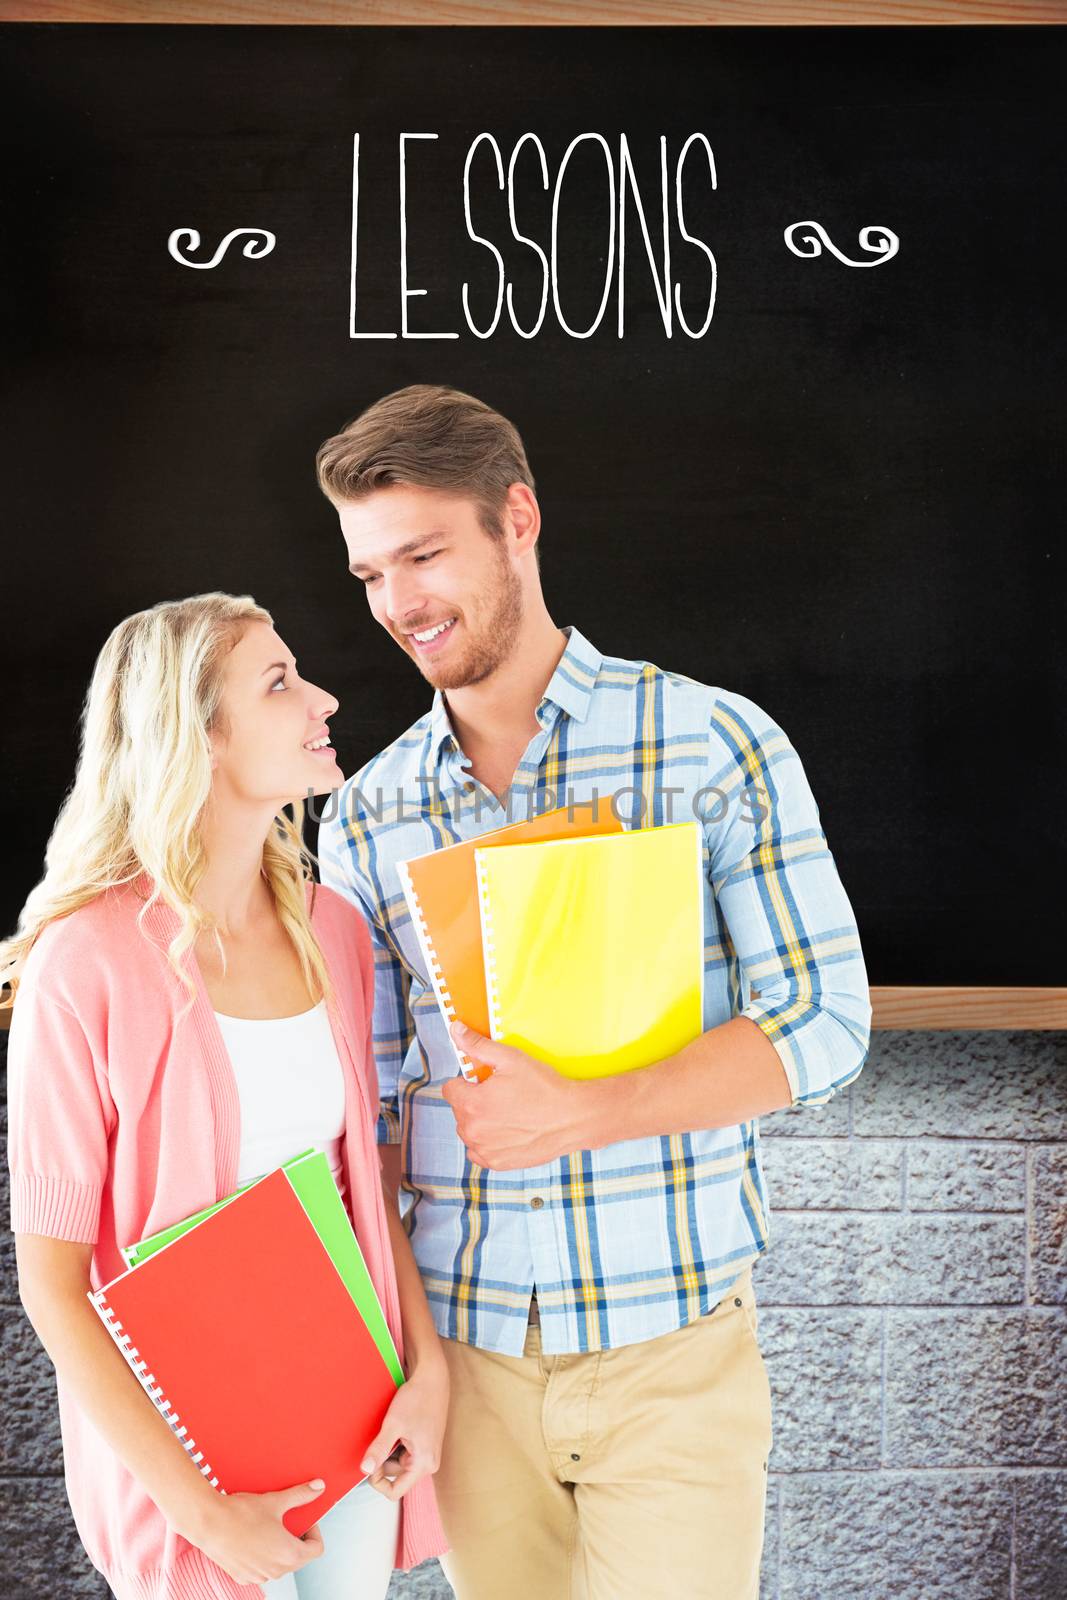 Lessons against chalkboard in classroom by Wavebreakmedia